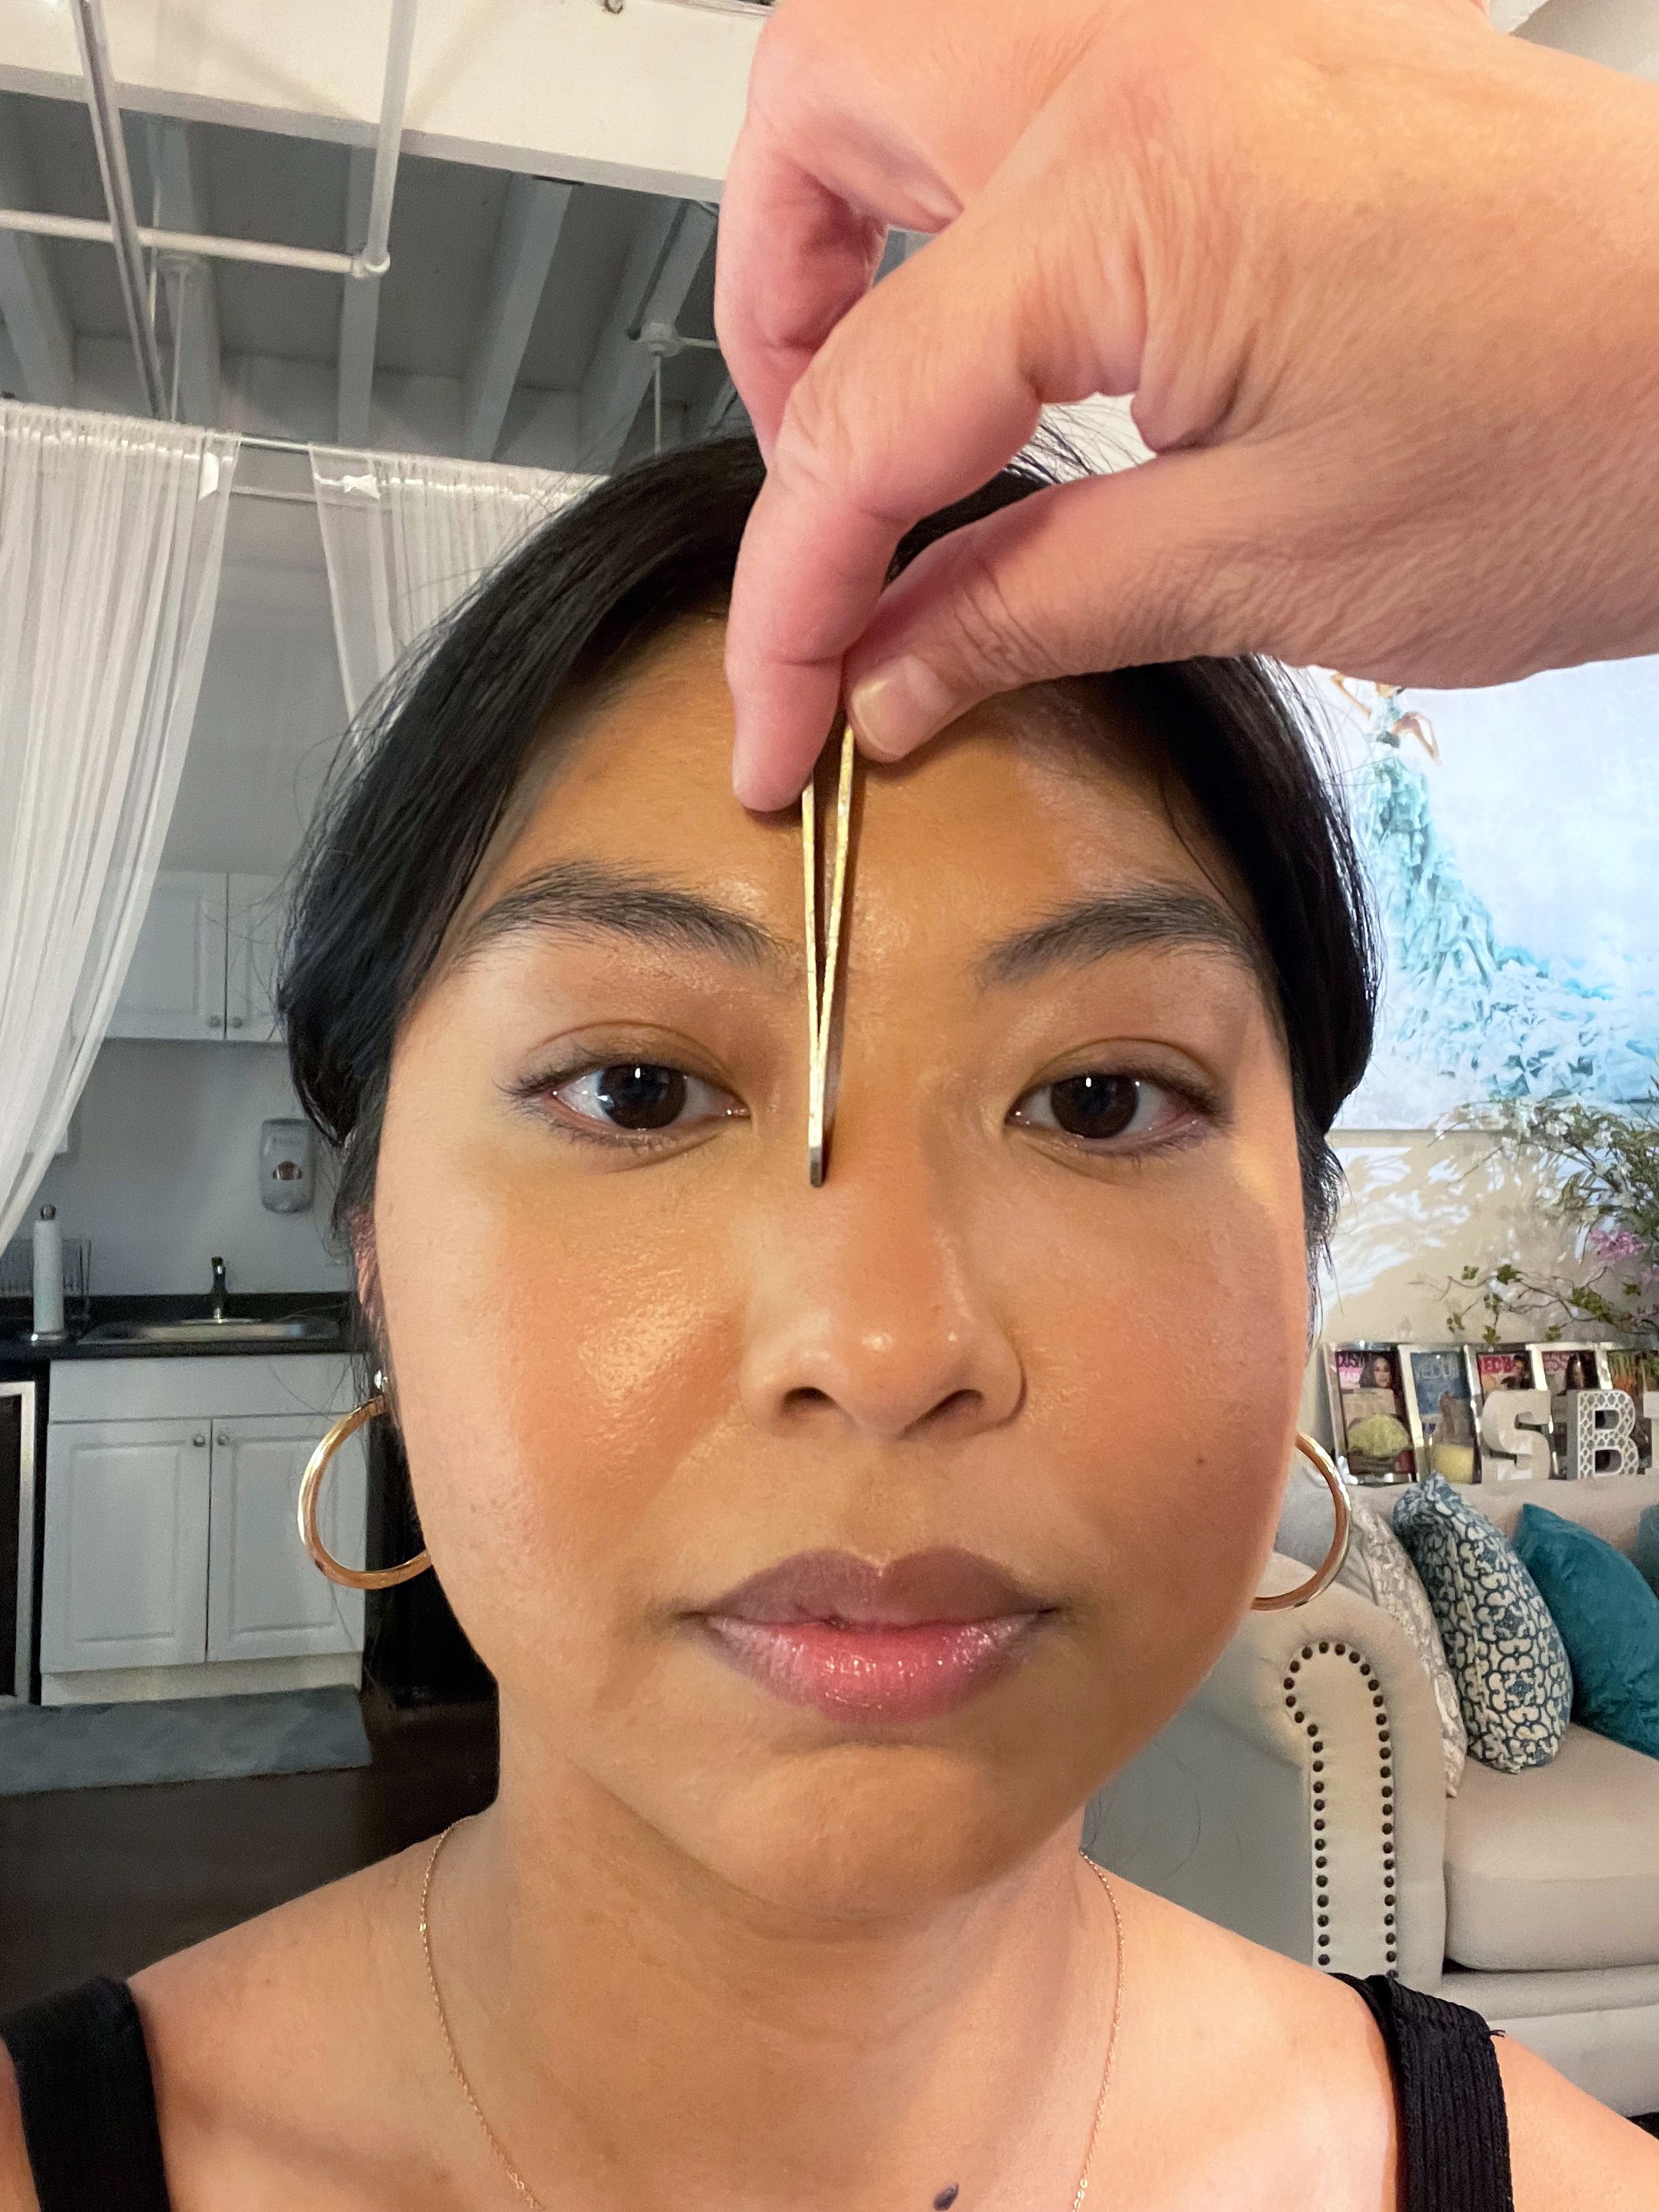 How to Shape Eyebrows - 3 Tips For Perfect Eyebrows in 2021